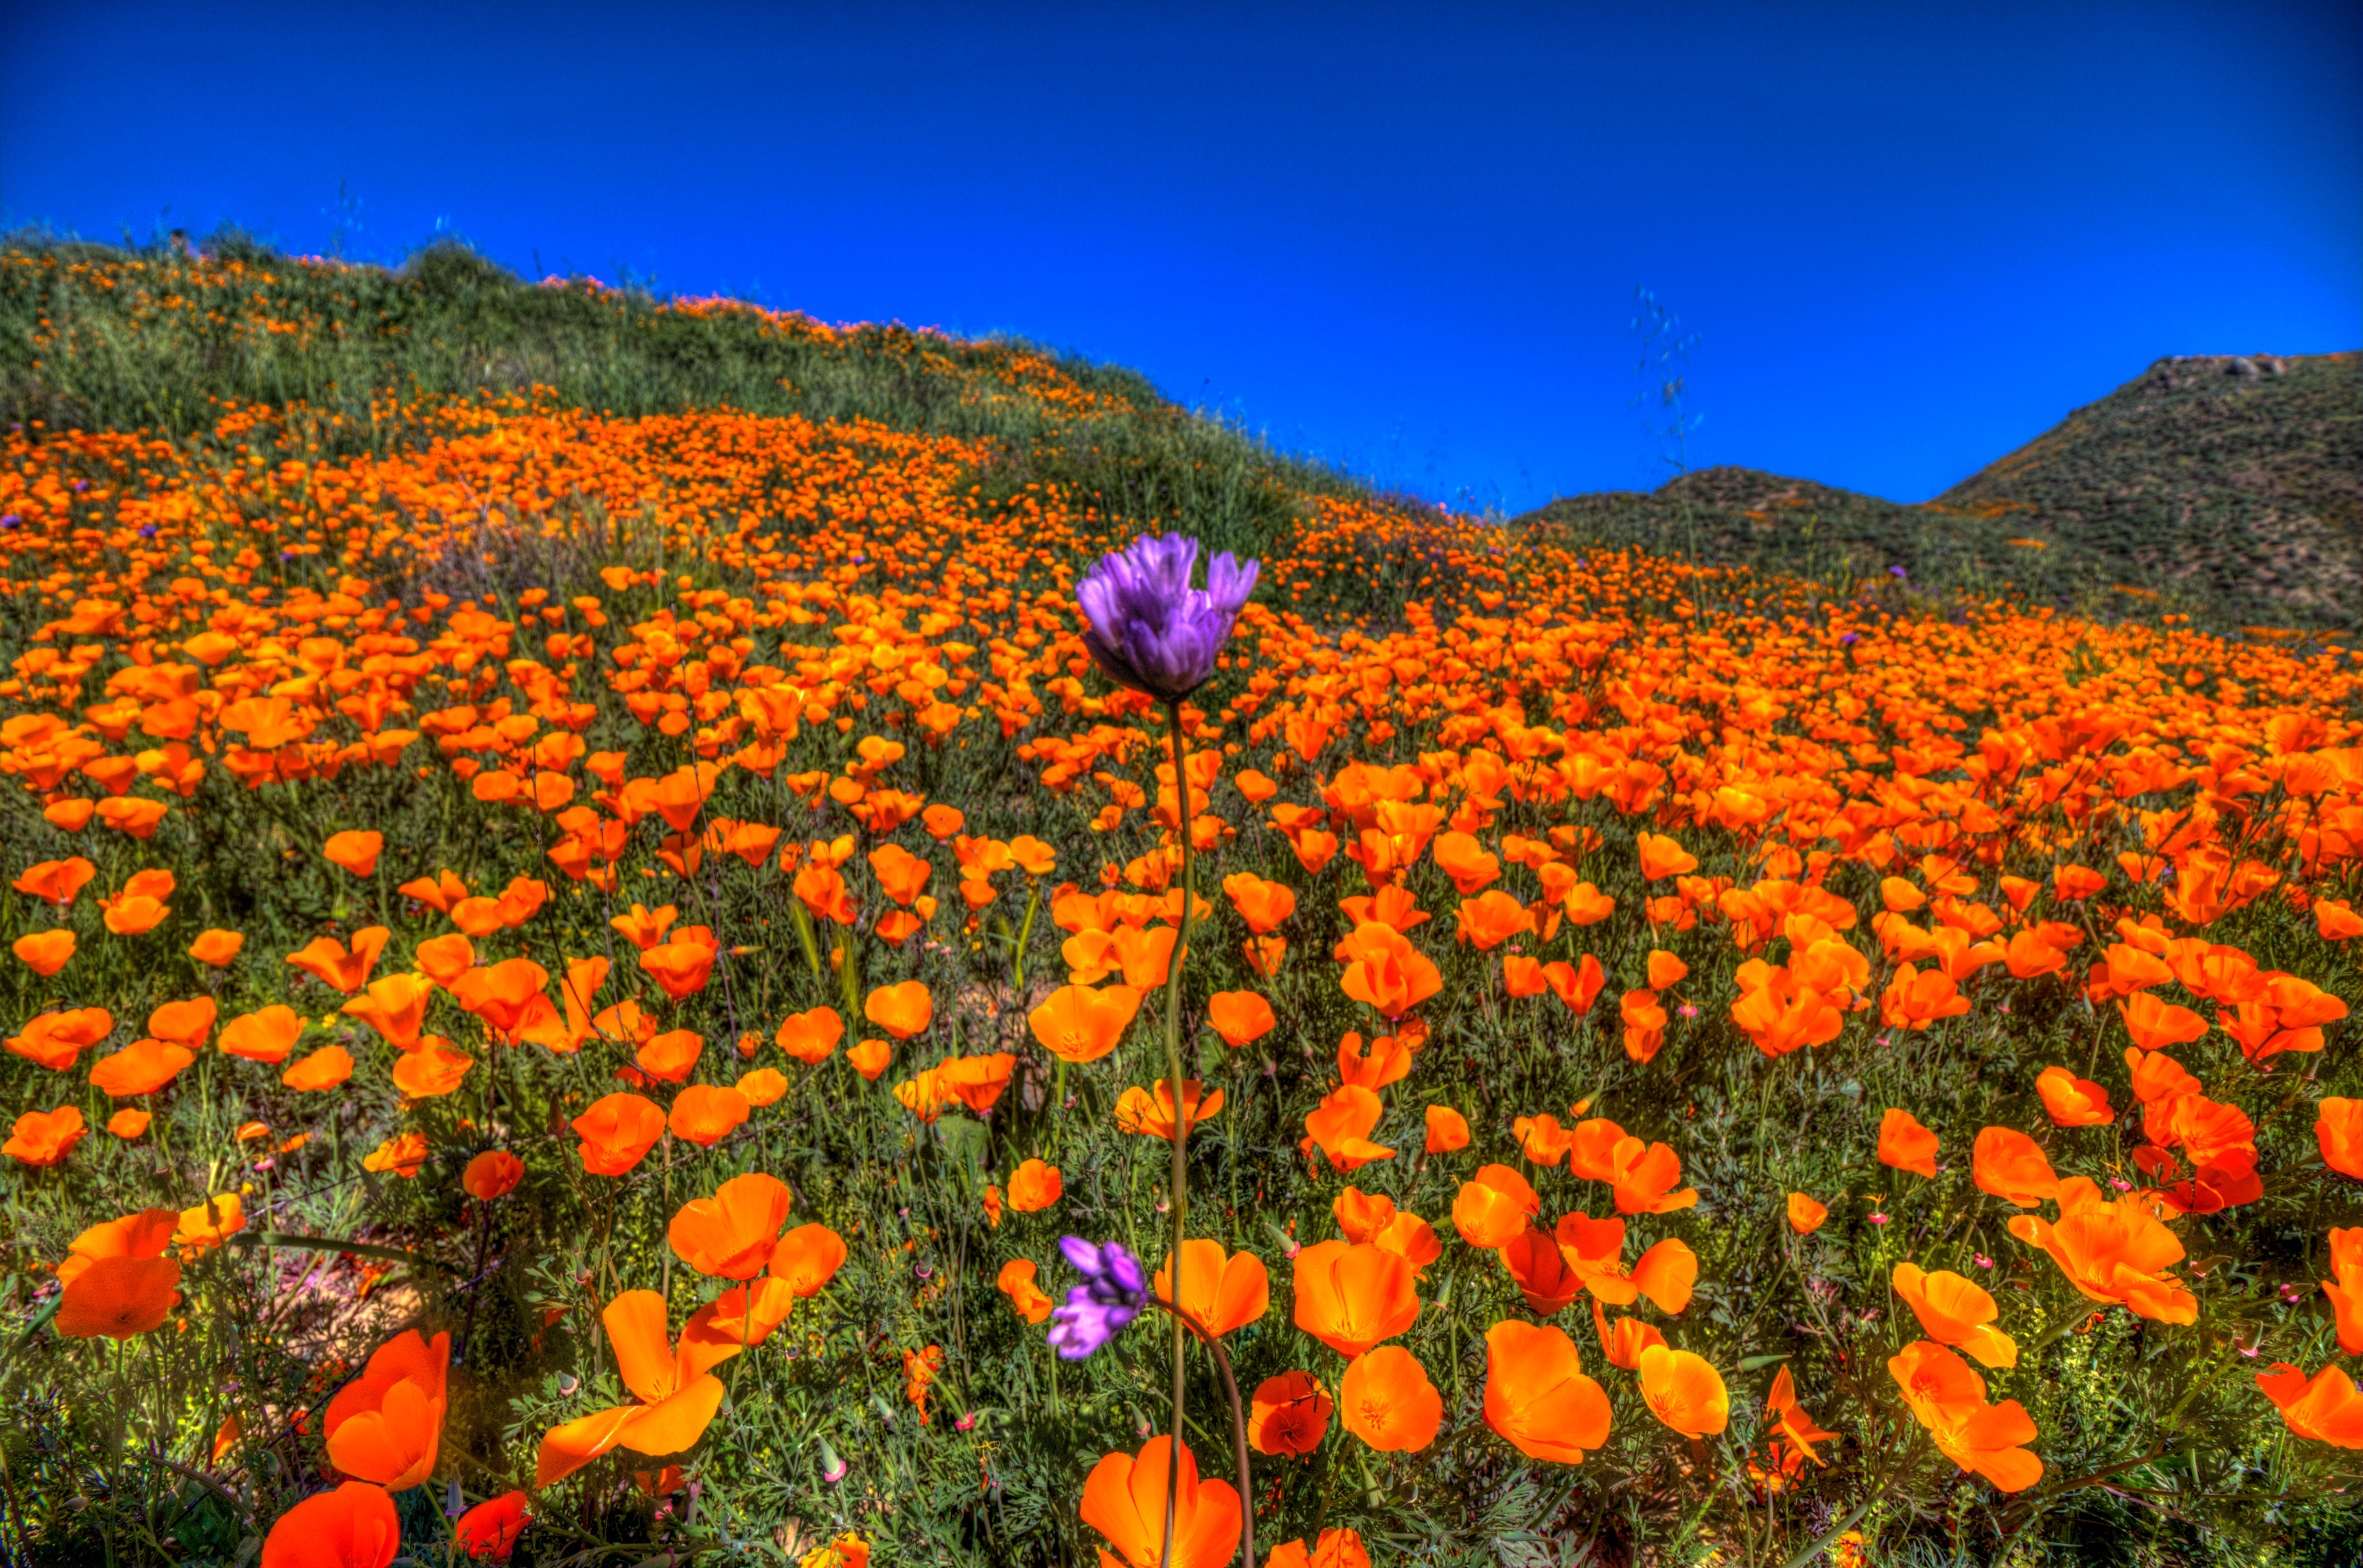 Wallpaper, walkercanyon, lakeelsinore, California, southerncalifornia, californiapoppy, poppies, flowers, blooms, color, gold 6010x3989